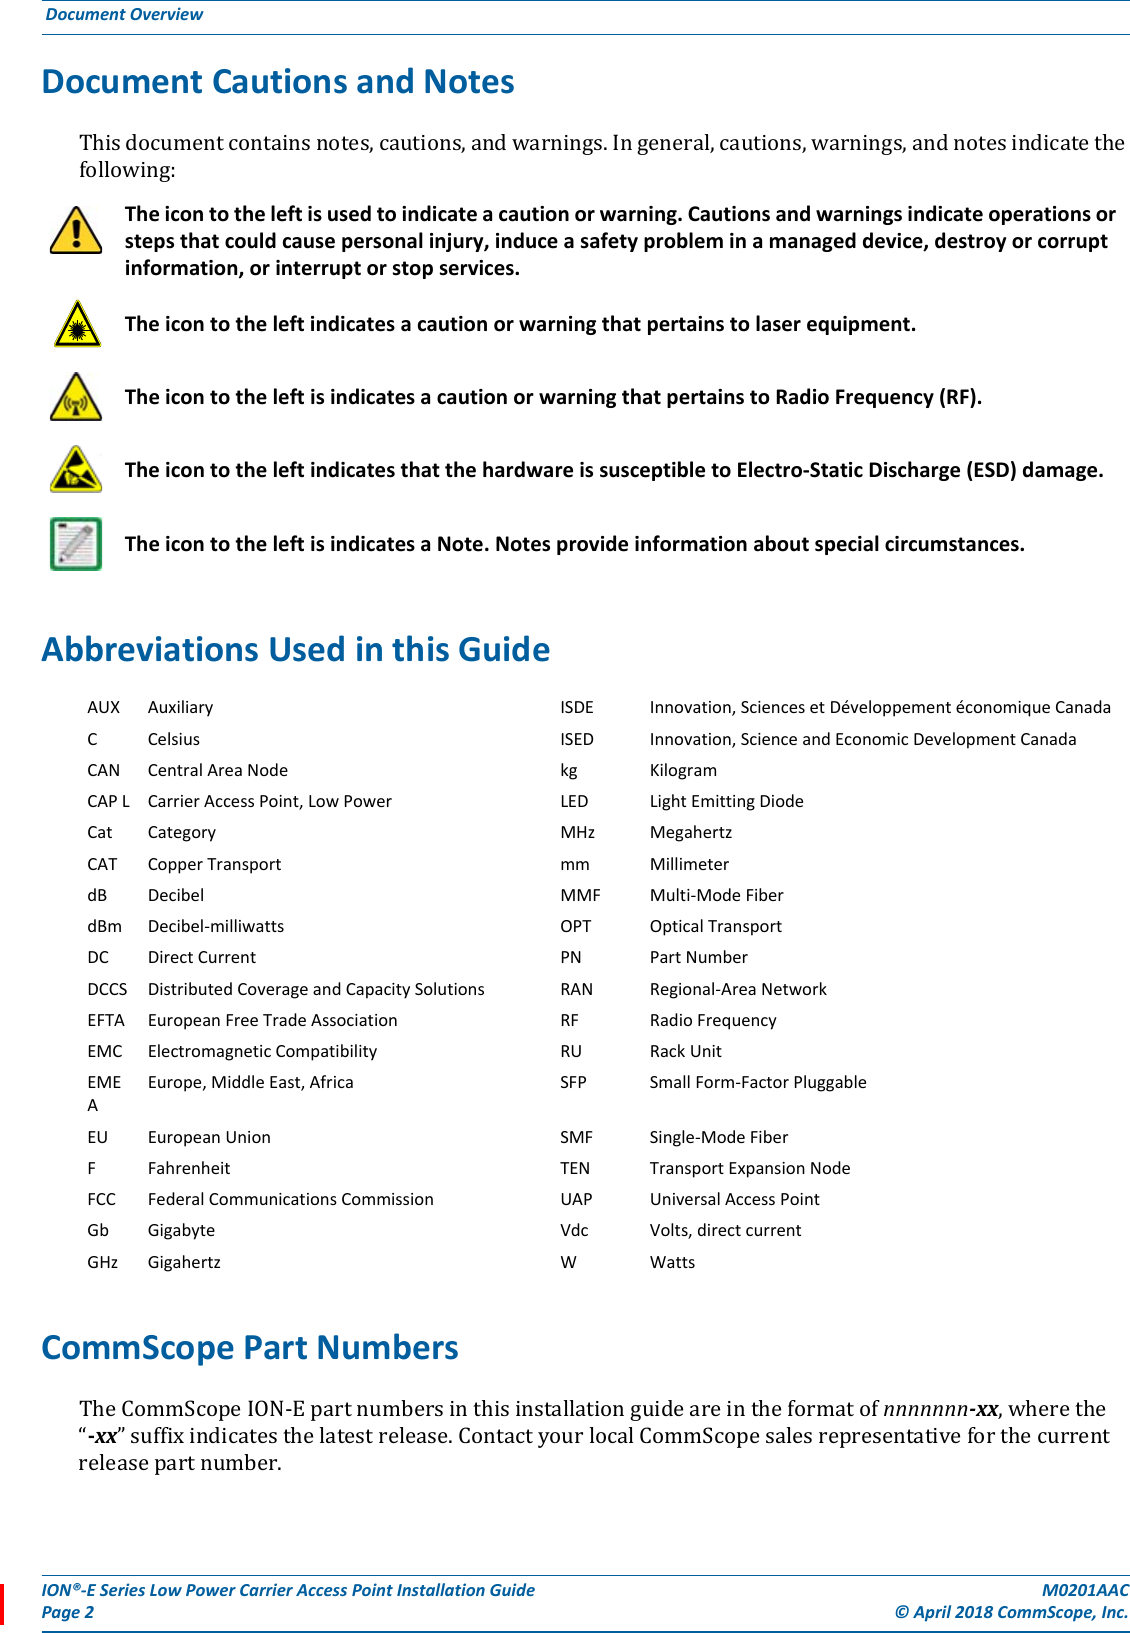 ION®-E Series Low Power Carrier Access Point Installation Guide M0201AACPage 2 © April 2018 CommScope, Inc. Document Overview  Document Cautions and NotesThisdocumentcontainsnotes,cautions,andwarnings.Ingeneral,cautions,warnings,andnotesindicatethefollowing:Abbreviations Used in this GuideCommScope Part NumbersTheCommScopeION-Epartnumbersinthisinstallationguideareintheformatofnnnnnnn-xx,wherethe“-xx”suffixindicatesthelatestrelease.ContactyourlocalCommScopesalesrepresentativeforthecurrentreleasepartnumber.The icon to the left is used to indicate a caution or warning. Cautions and warnings indicate operations or steps that could cause personal injury, induce a safety problem in a managed device, destroy or corrupt information, or interrupt or stop services. The icon to the left indicates a caution or warning that pertains to laser equipment.The icon to the left is indicates a caution or warning that pertains to Radio Frequency (RF).The icon to the left indicates that the hardware is susceptible to Electro-Static Discharge (ESD) damage.The icon to the left is indicates a Note. Notes provide information about special circumstances.AUX Auxiliary ISDE Innovation, Sciences et Développement économique CanadaCCelsius ISED Innovation, Science and Economic Development CanadaCAN Central Area Node kg KilogramCAP L Carrier Access Point, Low Power LED Light Emitting DiodeCat Category MHz MegahertzCAT Copper Transport mm MillimeterdB Decibel MMF Multi-Mode FiberdBm Decibel-milliwatts OPT Optical Transport DC Direct Current PN Part NumberDCCS Distributed Coverage and Capacity Solutions RAN Regional-Area NetworkEFTA European Free Trade Association RF Radio FrequencyEMC Electromagnetic Compatibility RU Rack UnitEMEAEurope, Middle East, Africa SFP Small Form-Factor PluggableEU European Union SMF Single-Mode Fiber FFahrenheit TEN Transport Expansion NodeFCC Federal Communications Commission UAP Universal Access PointGb Gigabyte Vdc Volts, direct currentGHz Gigahertz WWatts